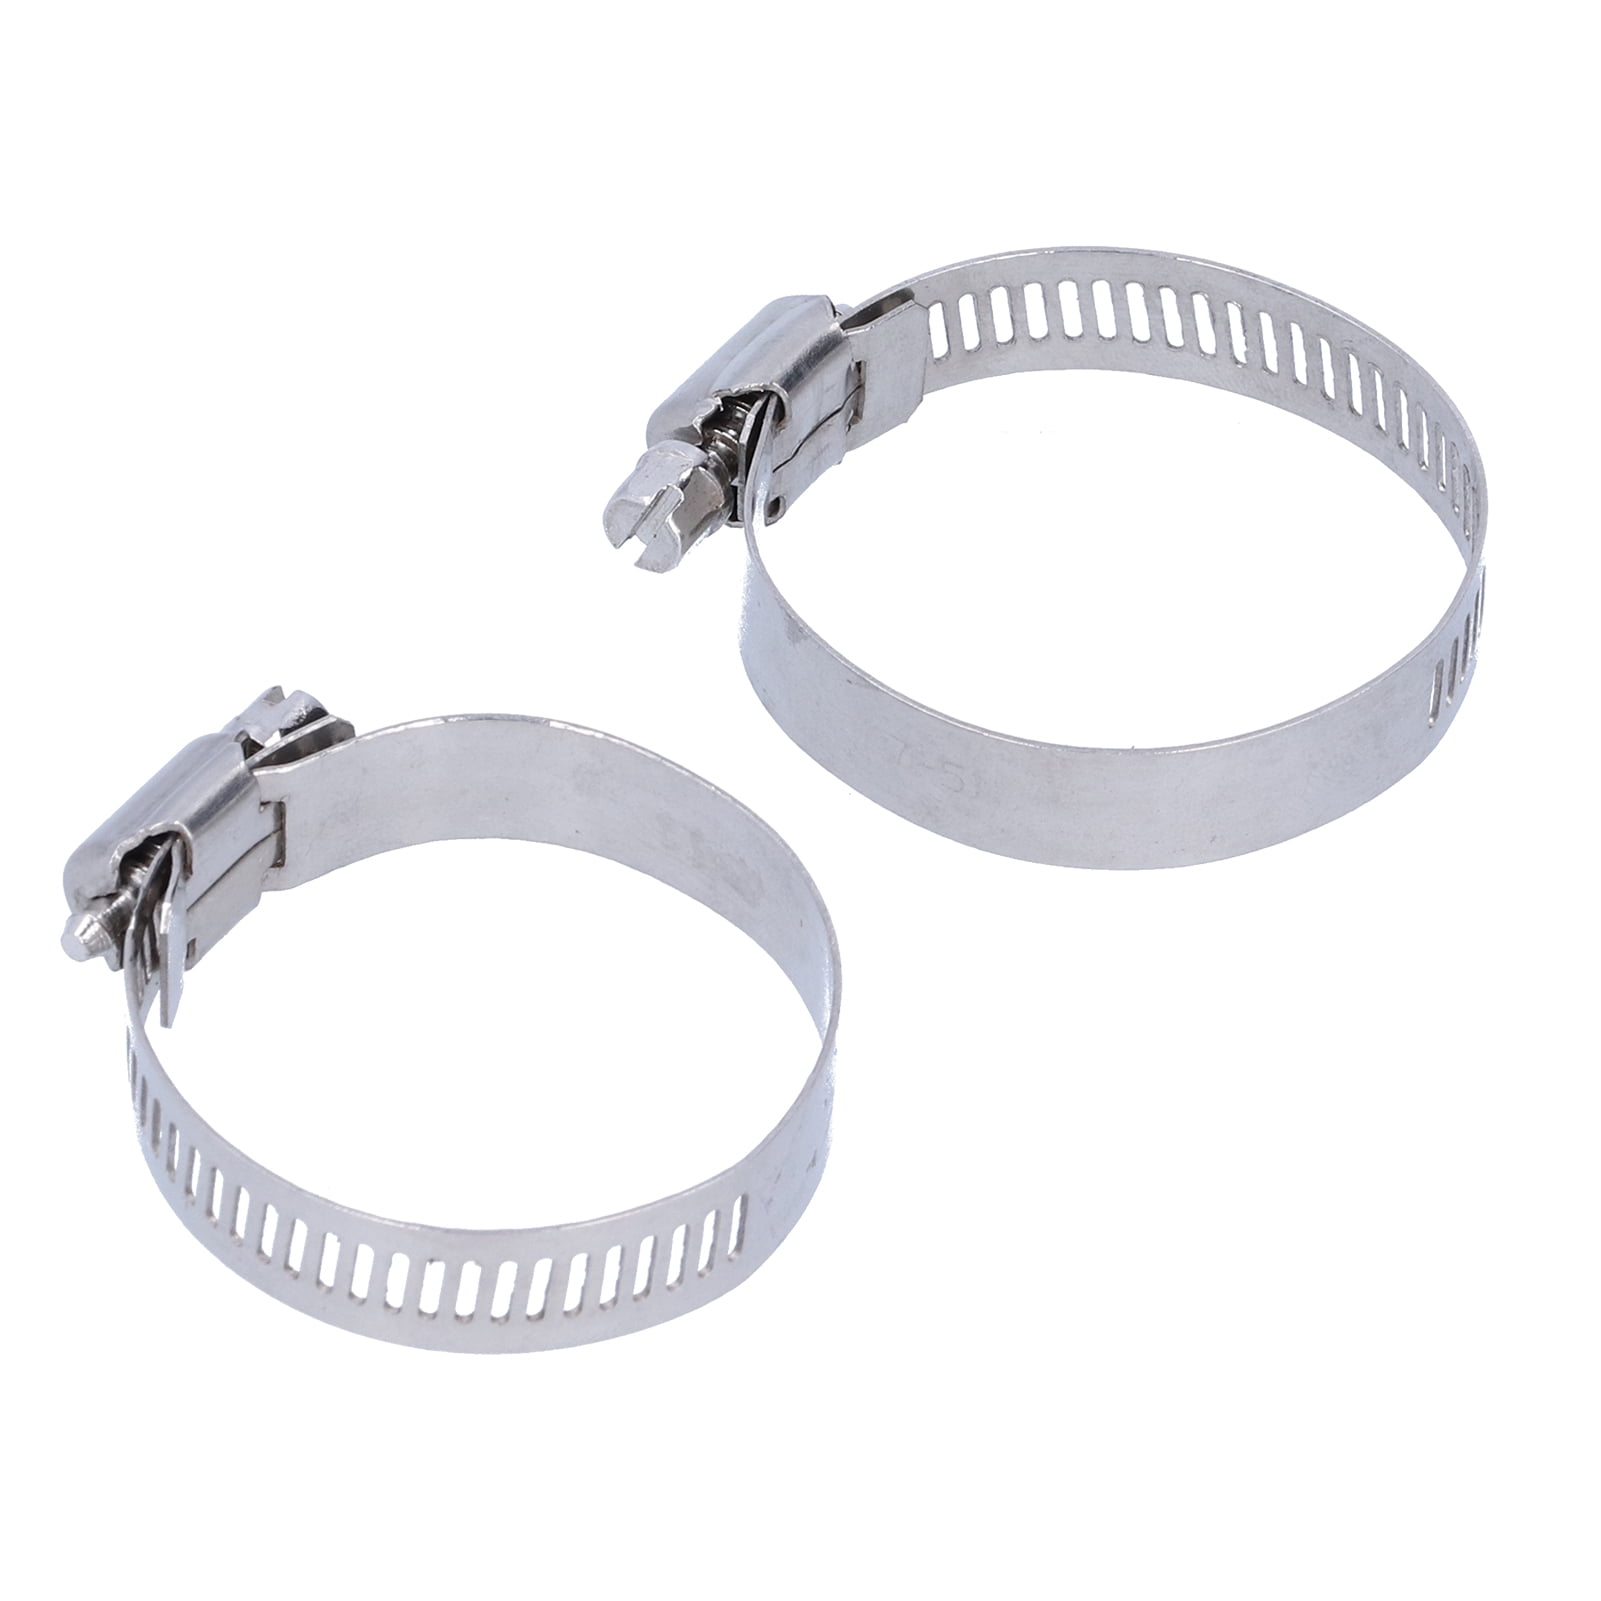 Hose Clamp, Stainless Steel Hose Tube